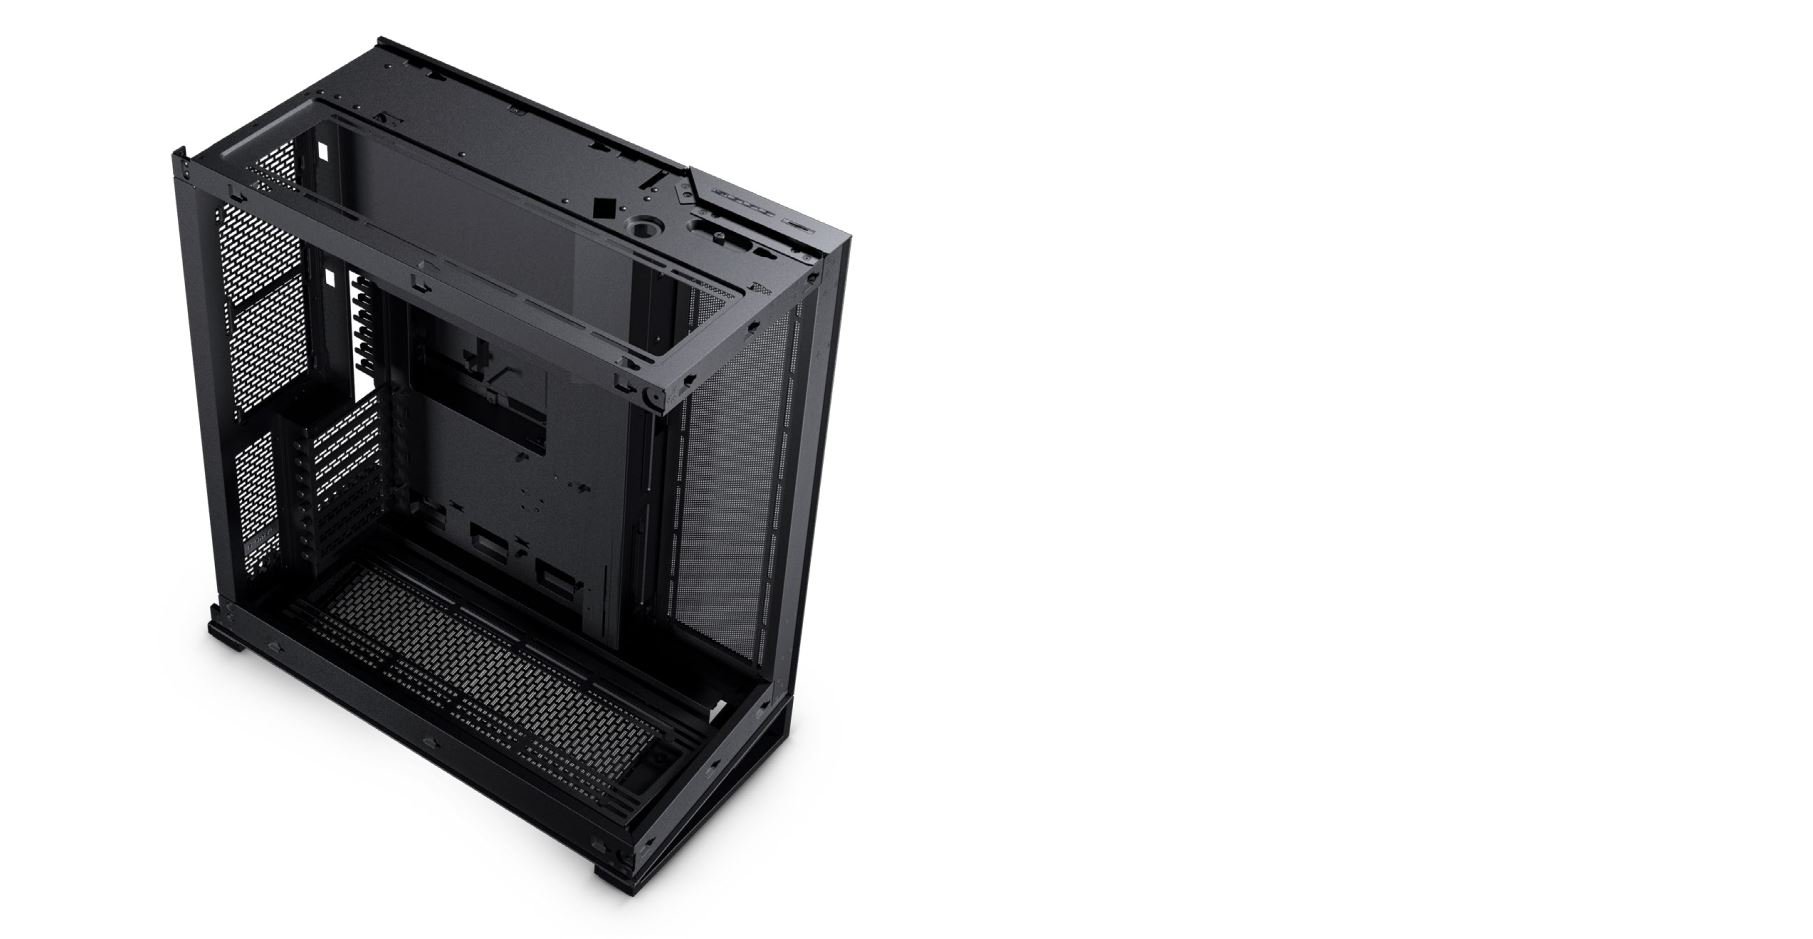  Phanteks (PH-NV723TG_DMW01) NV7 Showcase Full-Tower Chassis,  High Airflow Performance, Integrated D/A-RGB Lighting, Seamless Tempered  Glass Design, 12 Fan Positions, Matte White : Everything Else